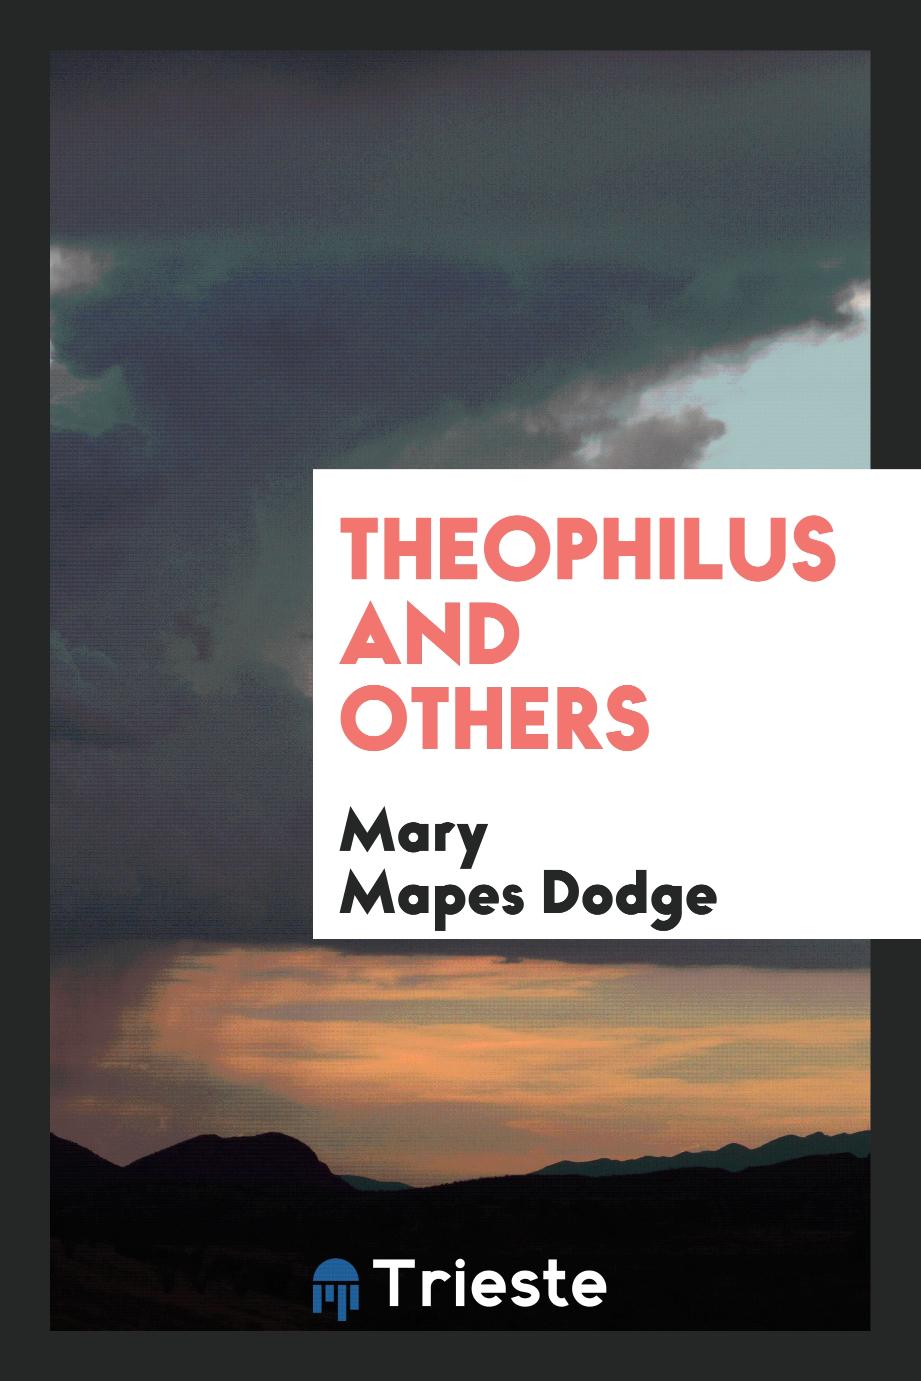 Theophilus and others